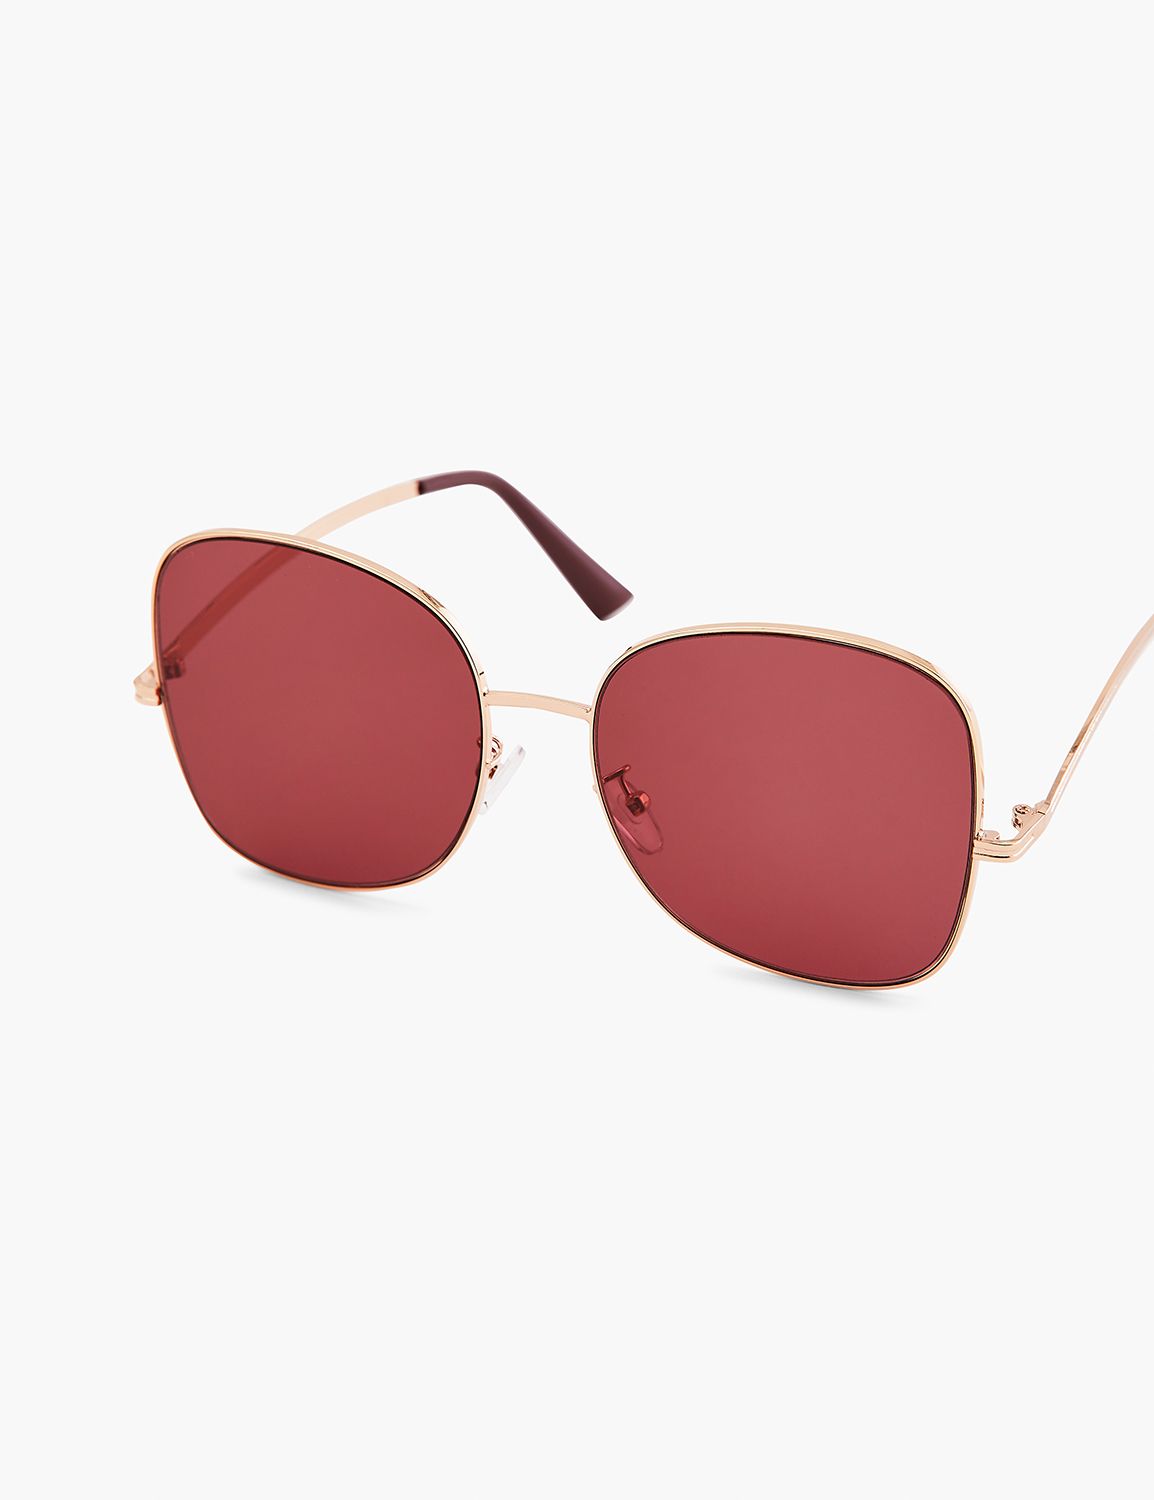 Lane Bryant Metal Butterfly Sunglasses ONESZ Iced Berry